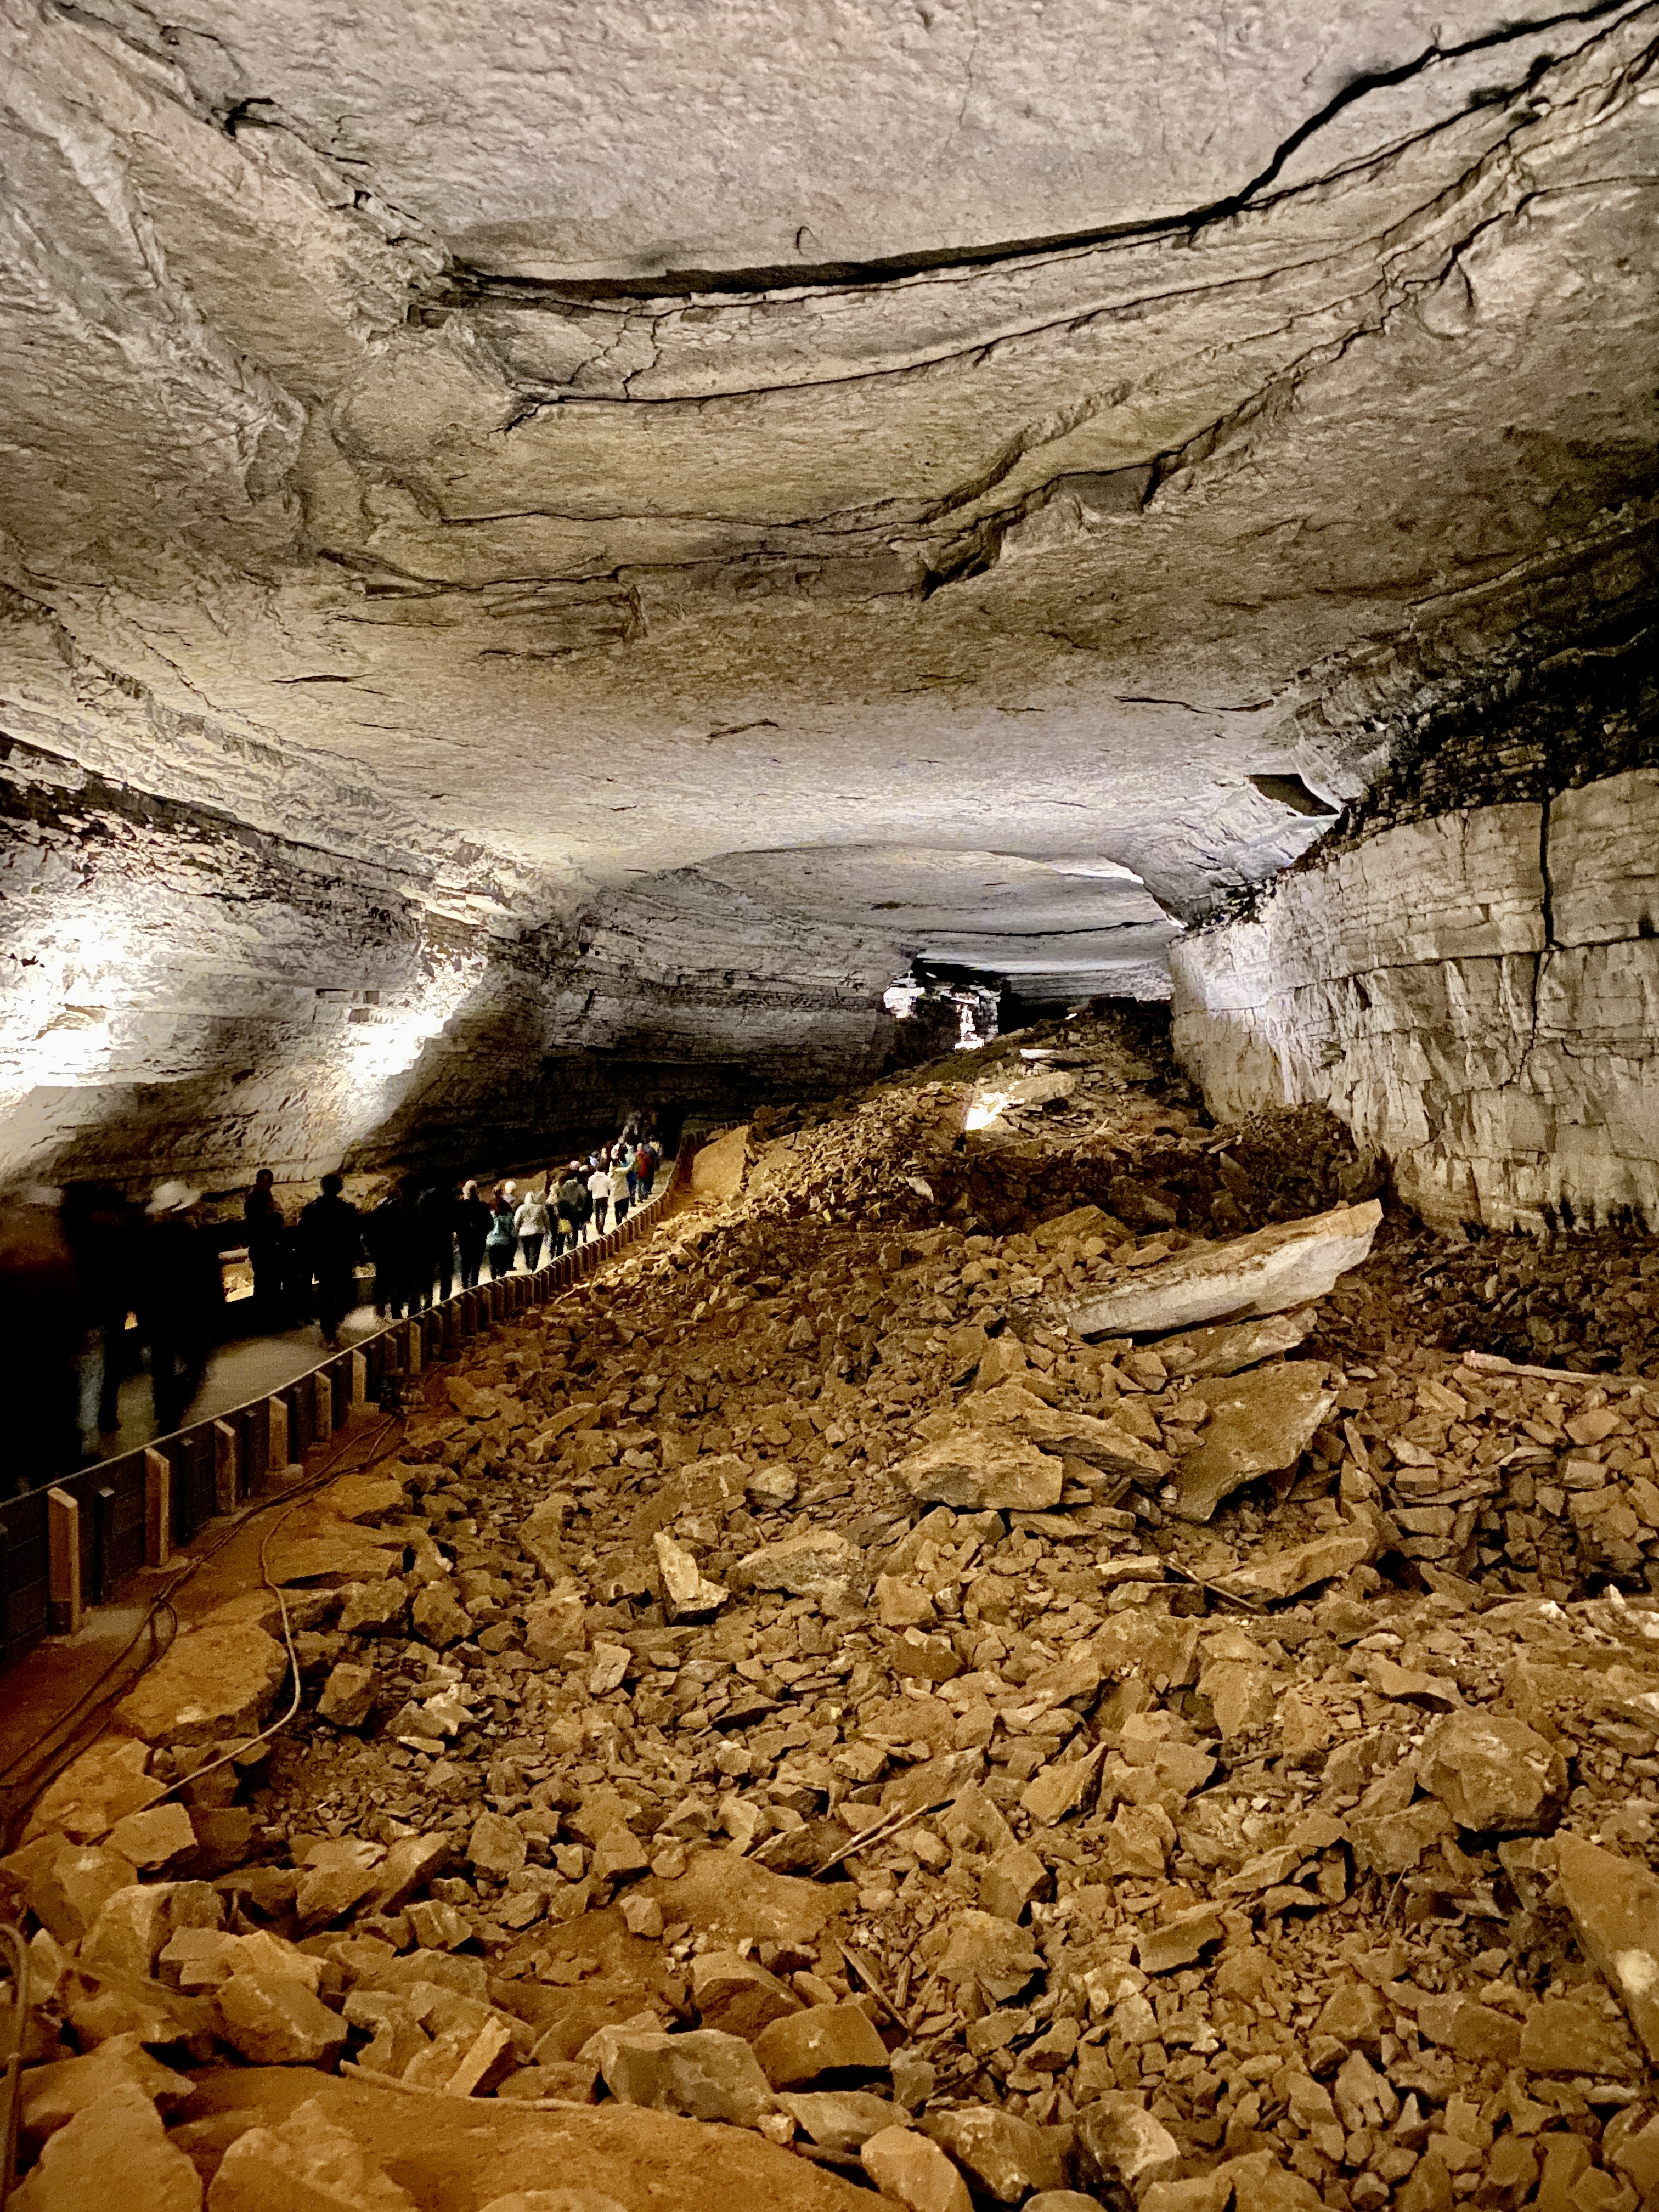 Gothic_Avenue%2C_Mammoth_Cave%2C_Mammoth_Cave_National_Park%2C_Mammoth_Cave%2C_KY_-_52725775662.jpg